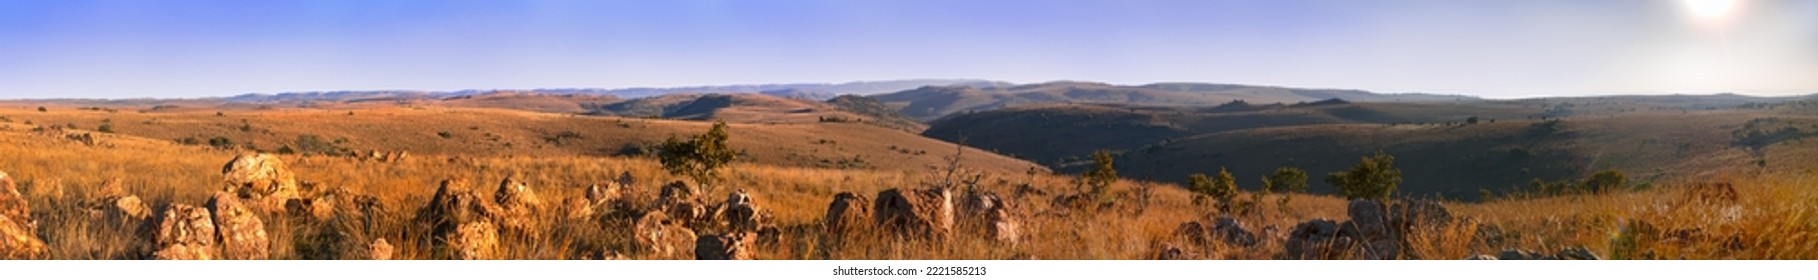 Cradle of Humankind World Heritage Site Landscape Panorama - Shutterstock ID 2221585213